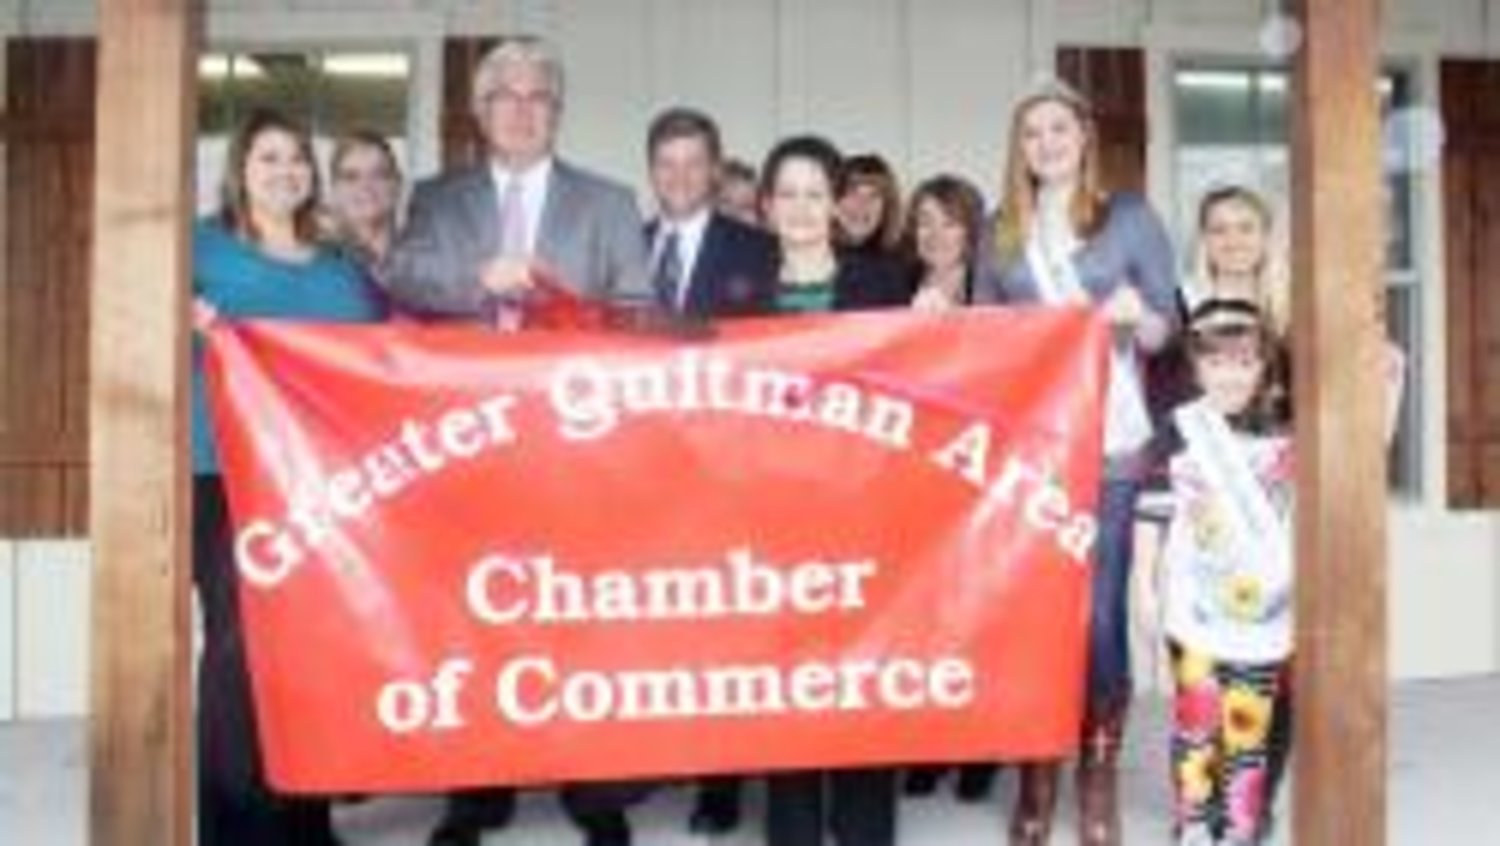 Texas Farm Bureau had a ribbon-cutting celebrating their membership in Greater Quitman Area Chamber of Commerce. At the ribbon-cutting were (left to right) Kylie O'Neal, Lesley Surratt, Tim Yeager, David Dobbs, Denea Hudman, Debbie Skinner, Linda Scarbo, Karen Hunter, Haven Hardy, Bethany Webber with Gabby Chaney in front.